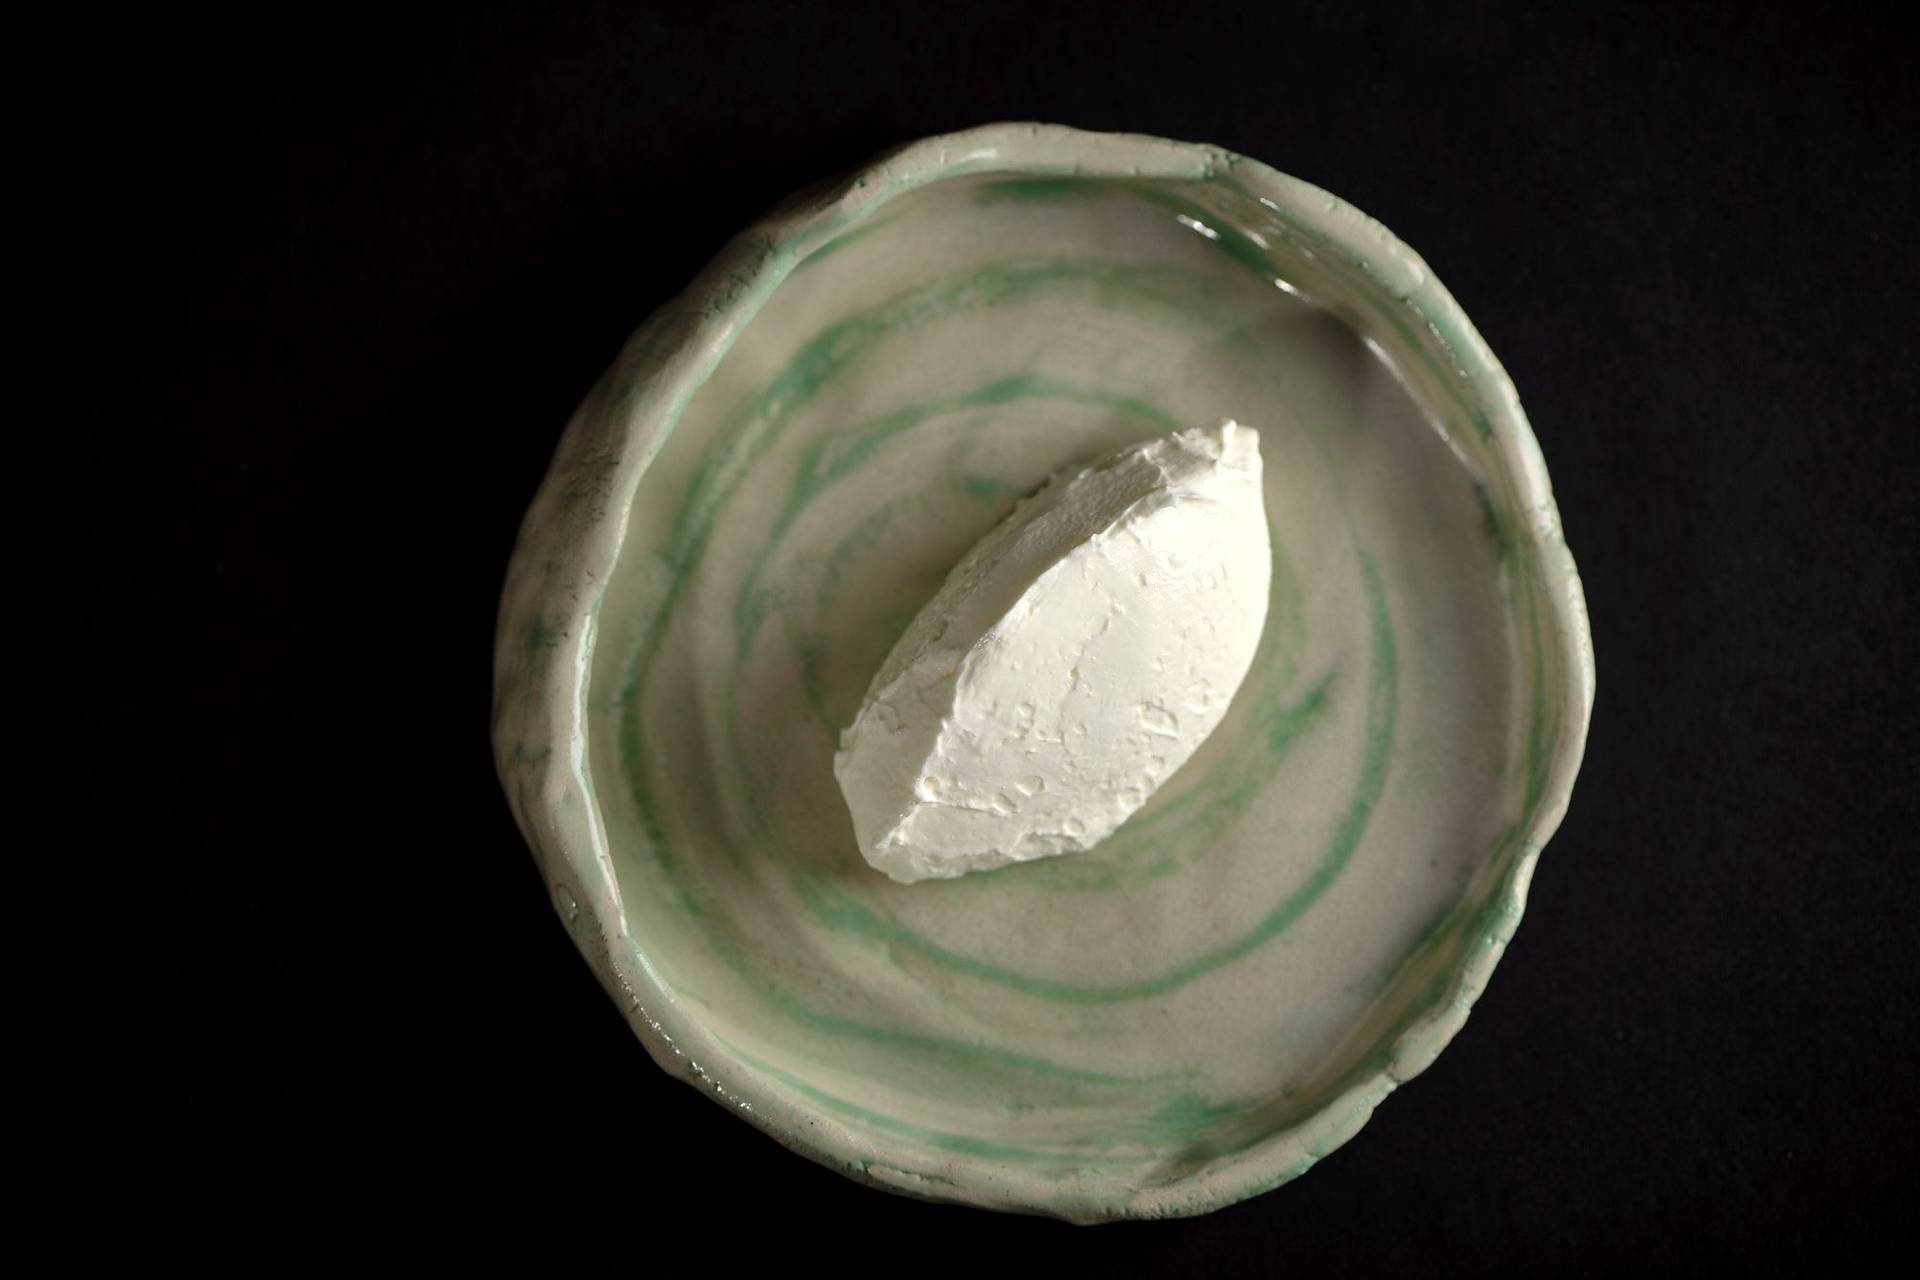 a spoon of creme fraiche on a ceramic plate with black background